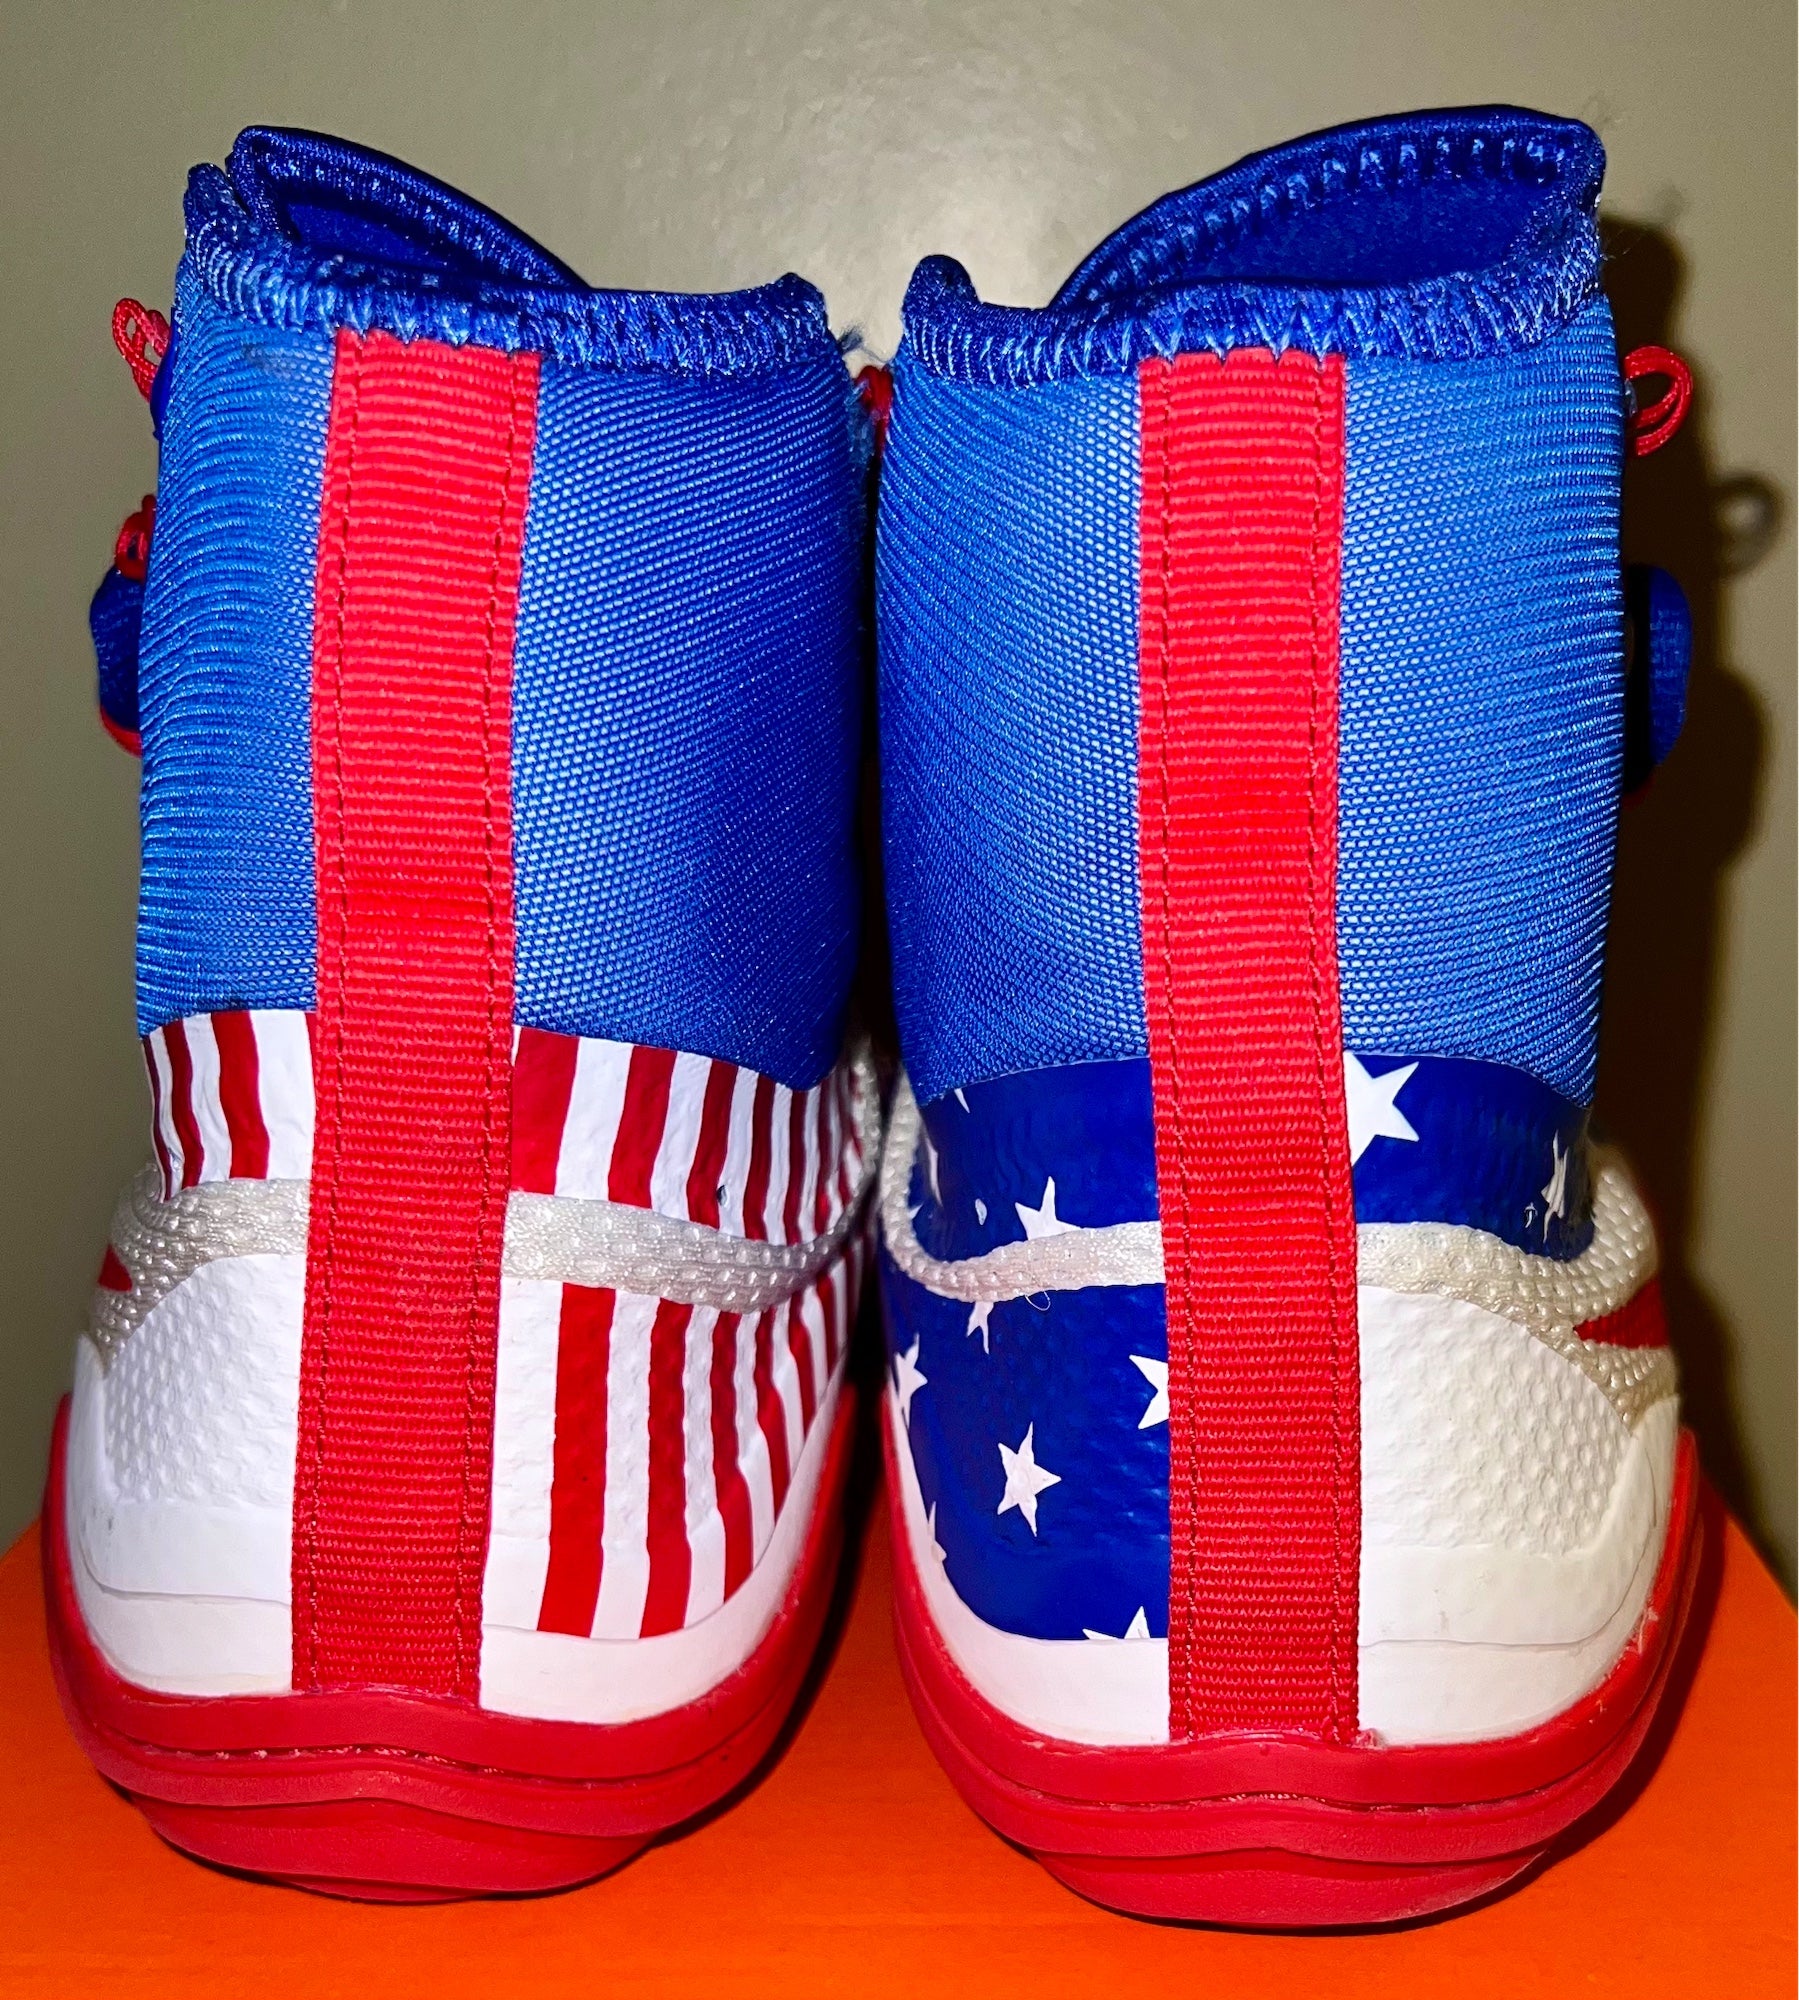 Mens size 9 Nike Hypersweep Wrestling Shoes Stars & Stripes Red